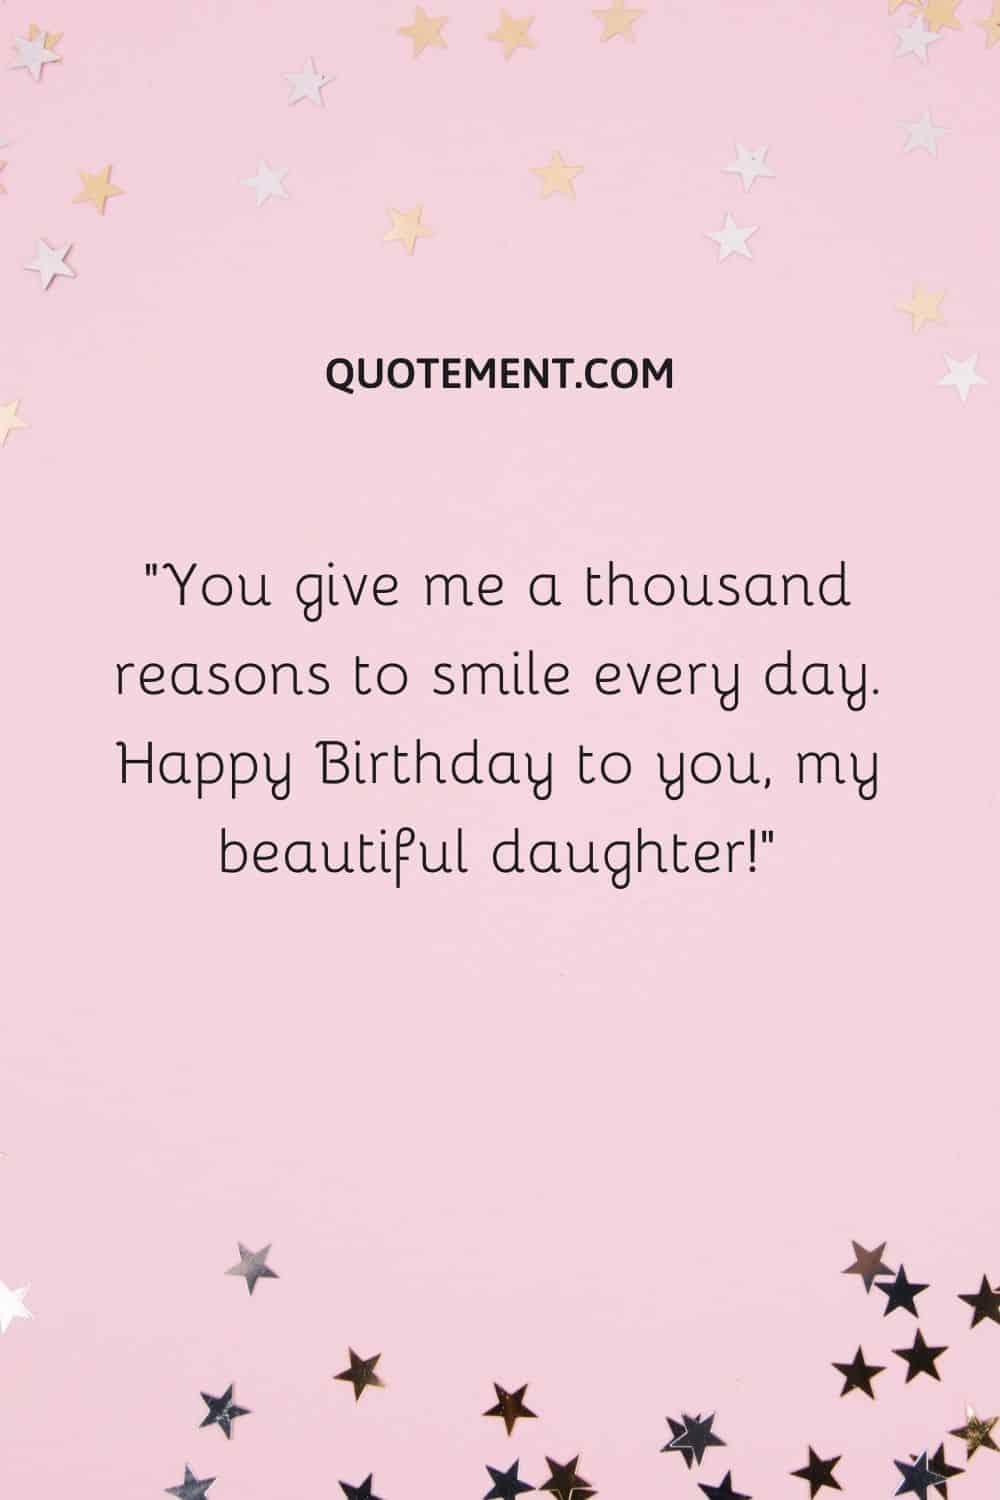 150 Emotional Birthday Wishes For Daughter From Mom